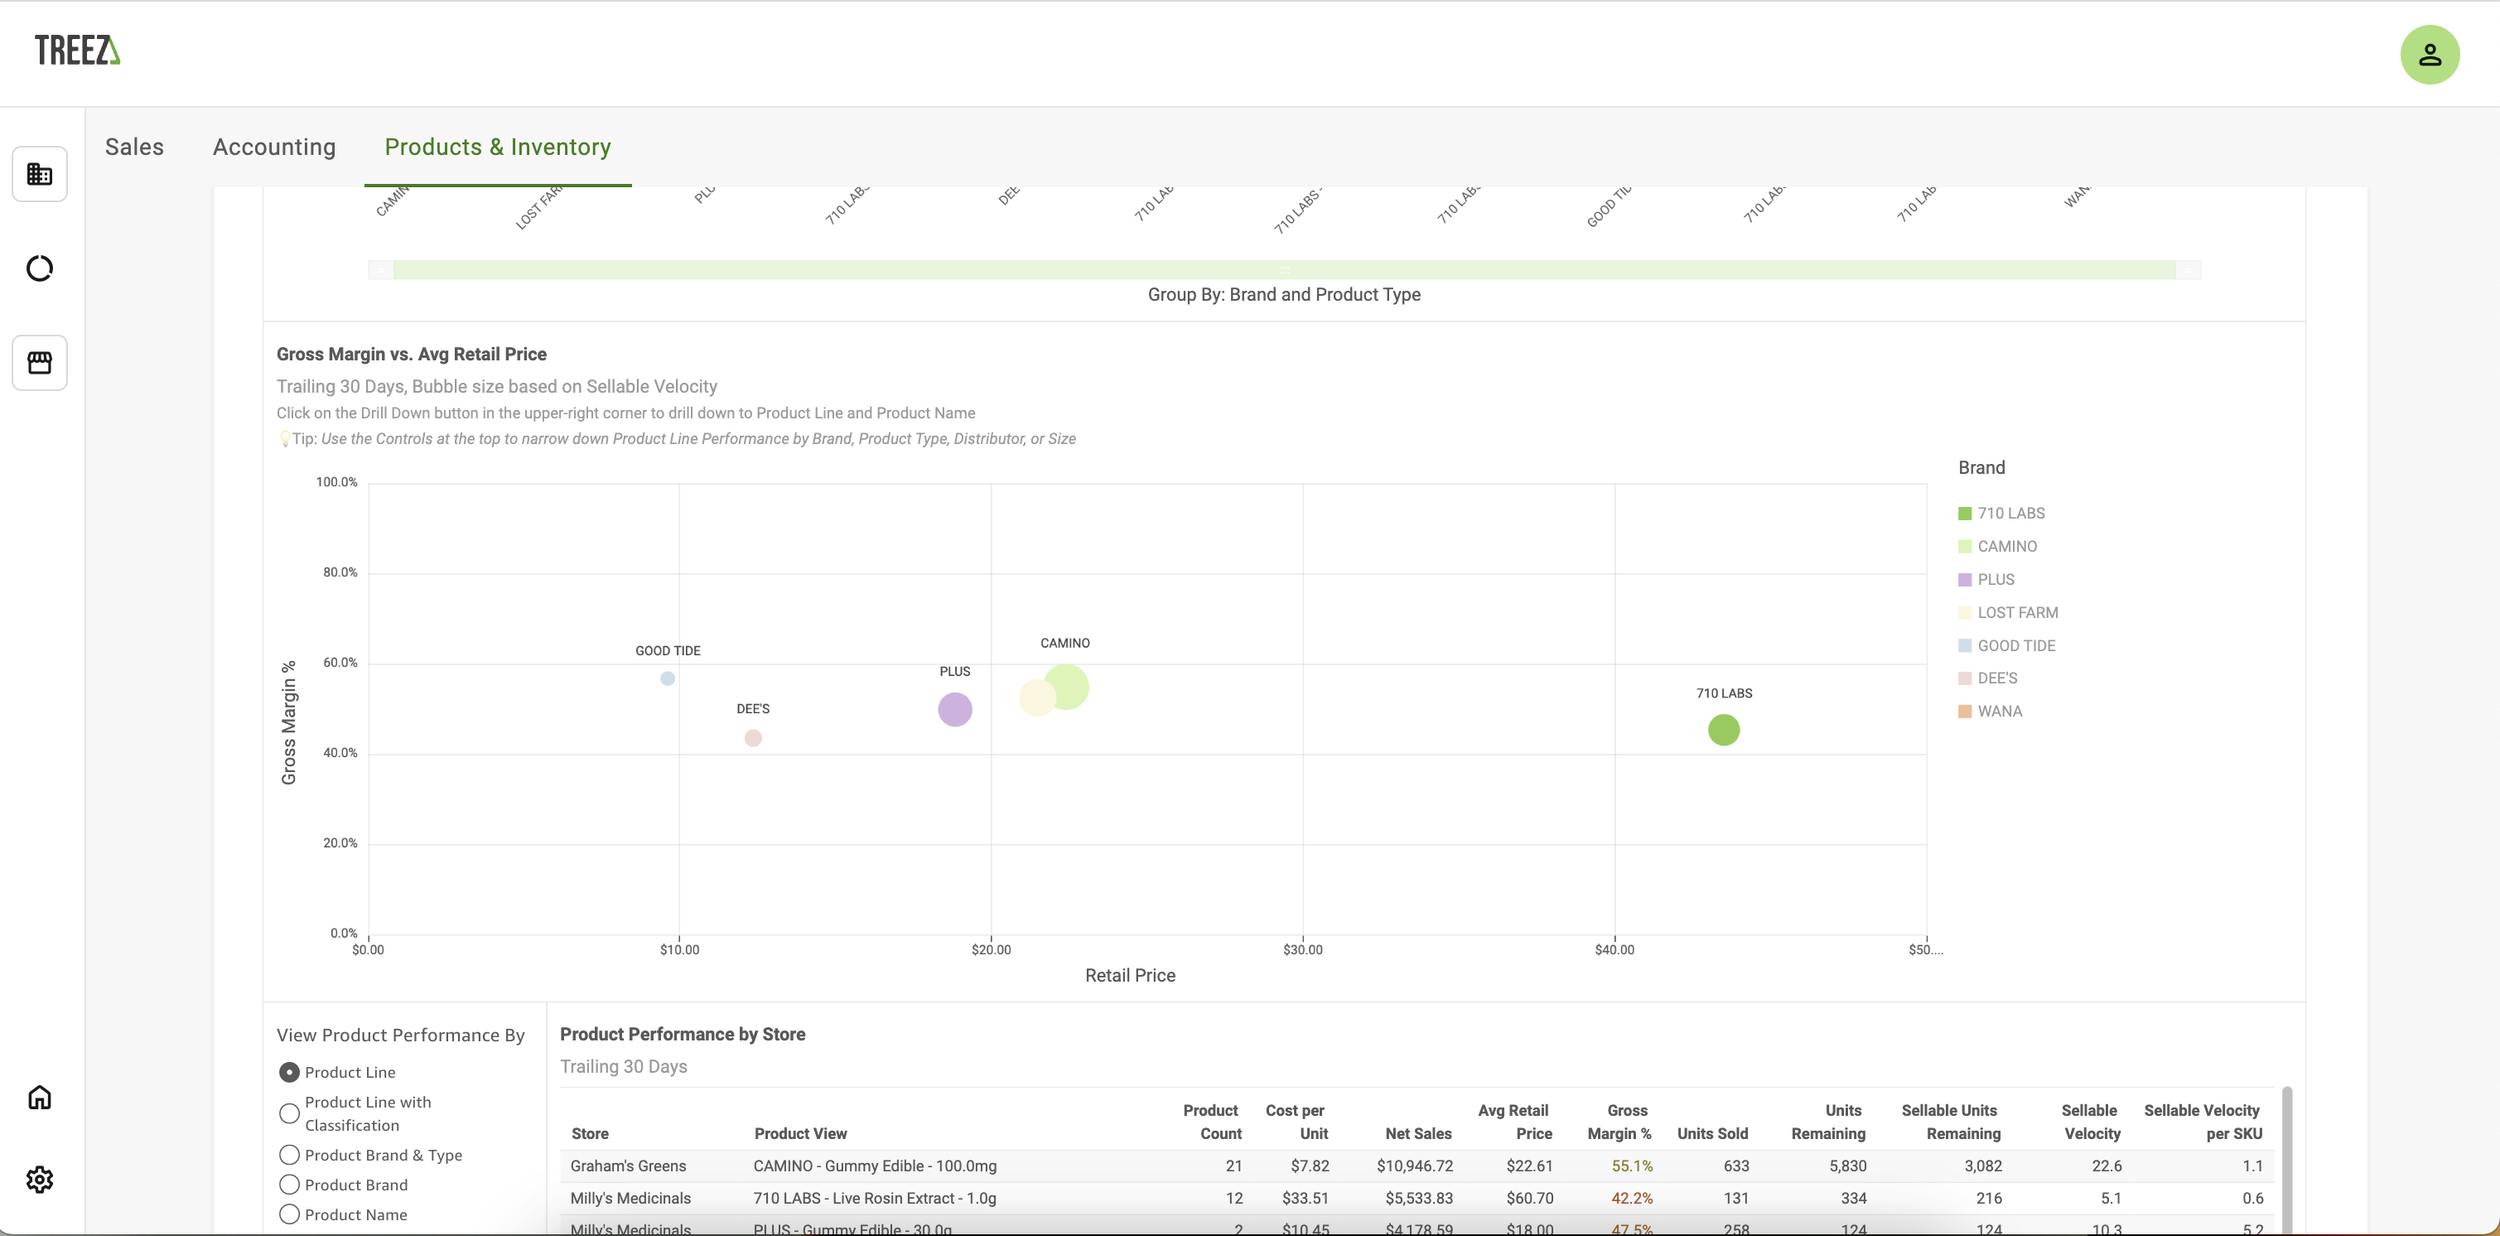 A screenshot from Treez Retail Analytics - specifically the Gross Margin vs. Avg Retail Price bubble graphic in Products & Inventory - varying sizes and colors of bubbles dot the chart, showing a comparison of how well a product is selling as well as the margin and price of the product.